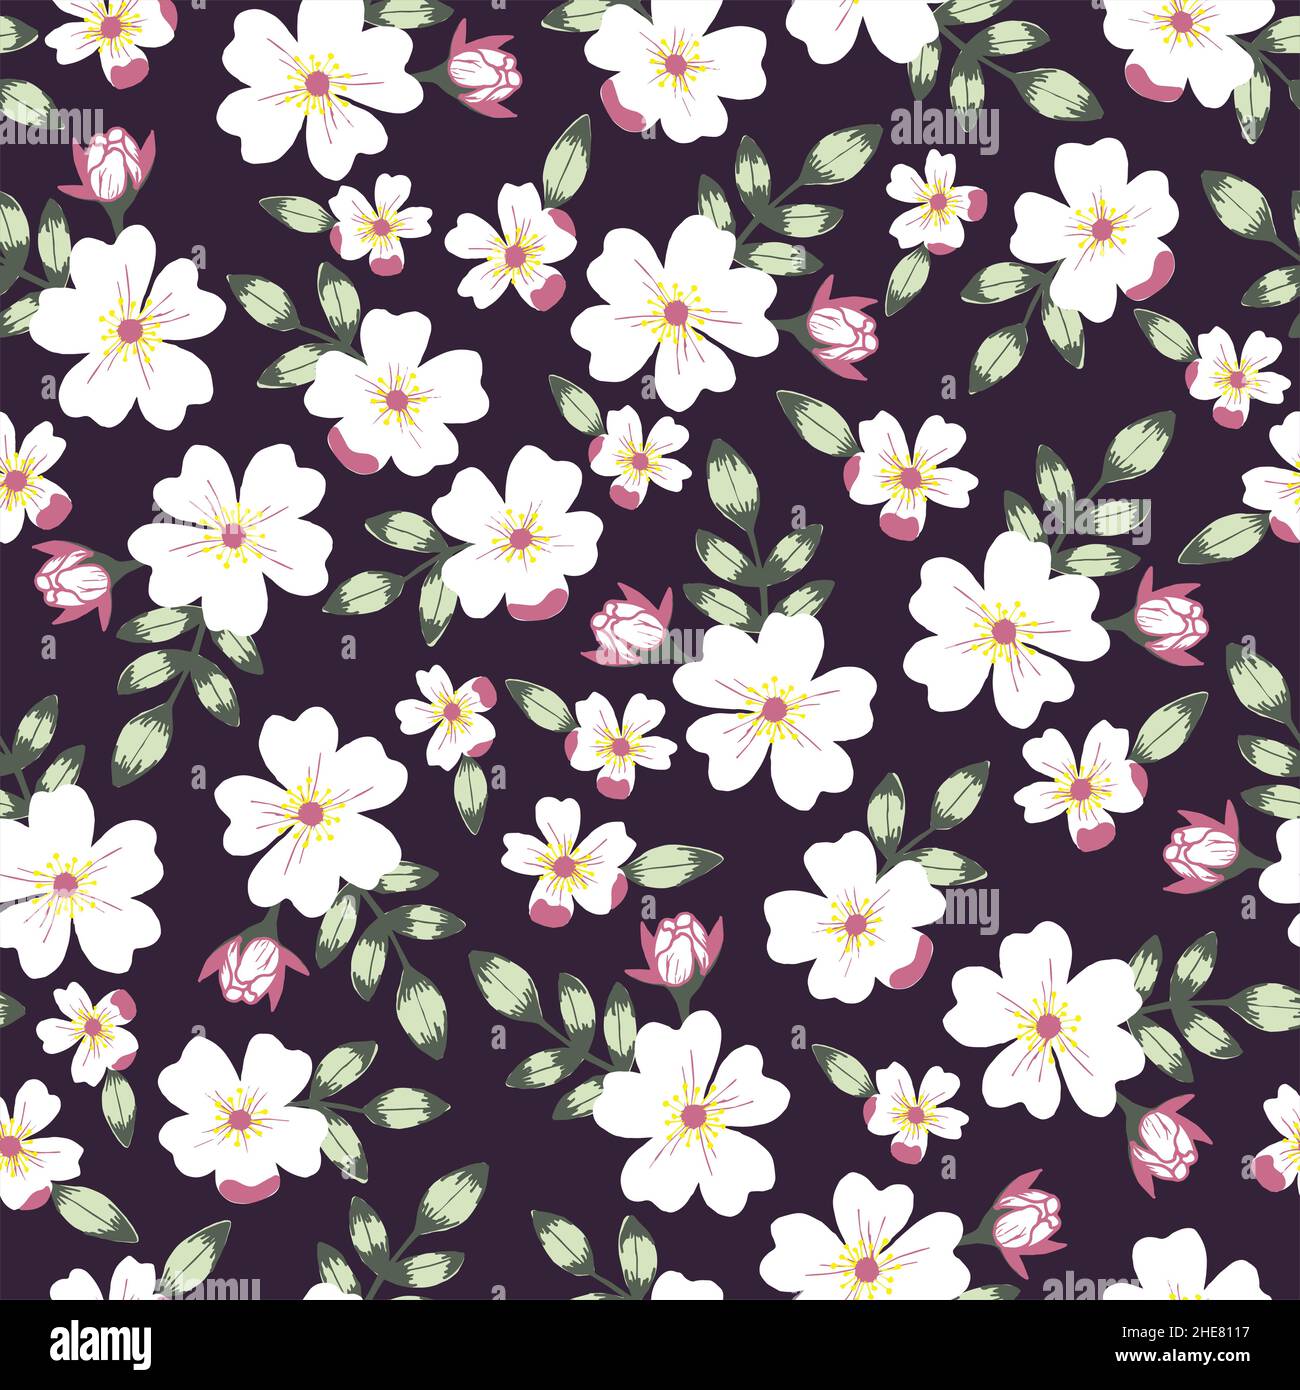 Spring flowers seamless vector pattern vector illustration on a